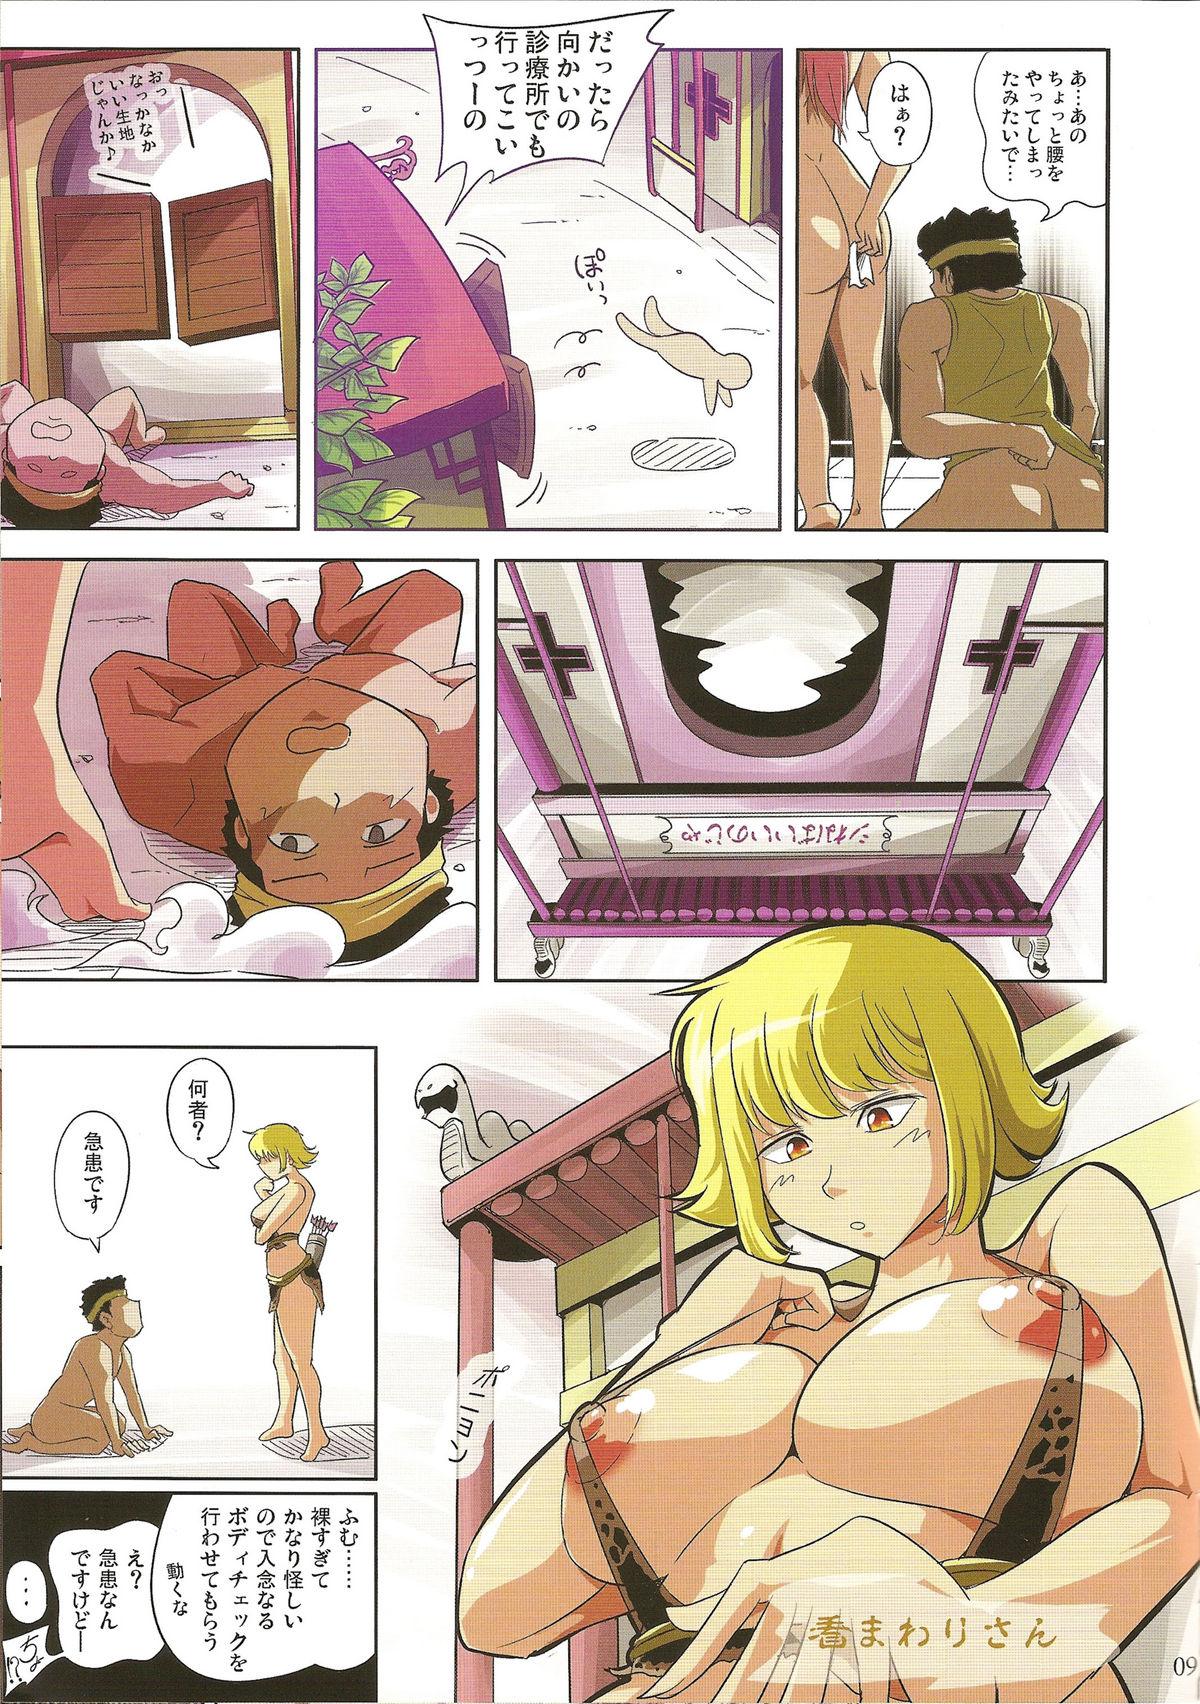 Pounded Tougenkyou - One piece Studs - Page 9